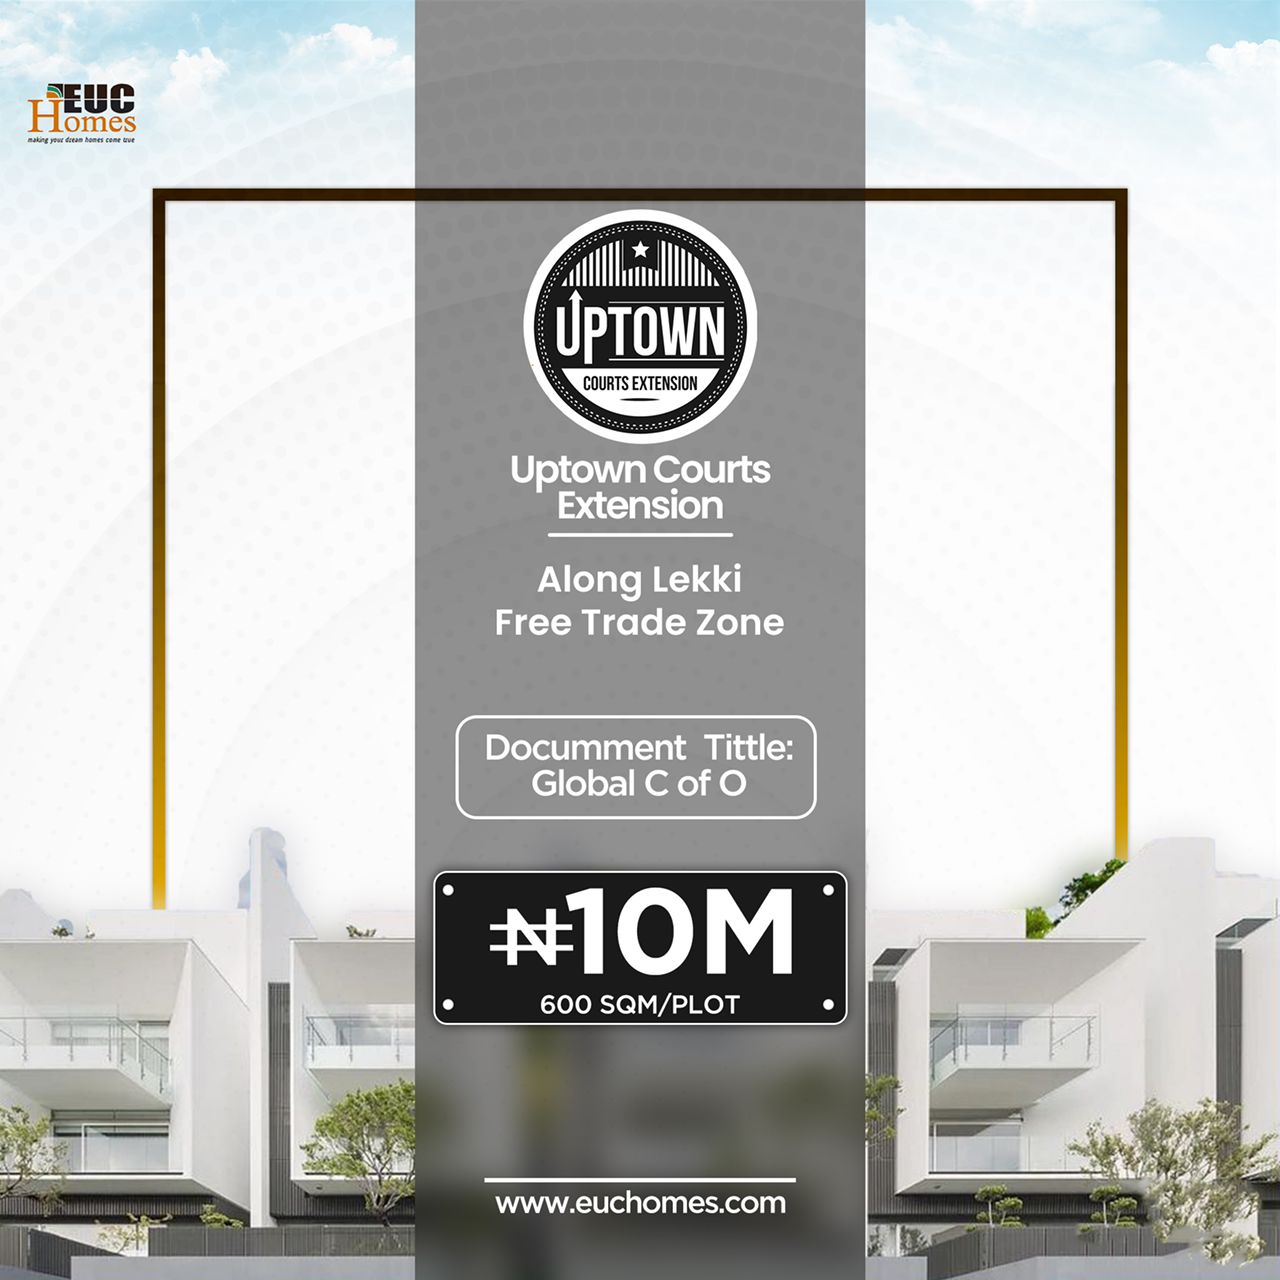 Independence offer: Details Of Ongoing Uptown Courts By EUC Homes Emerge